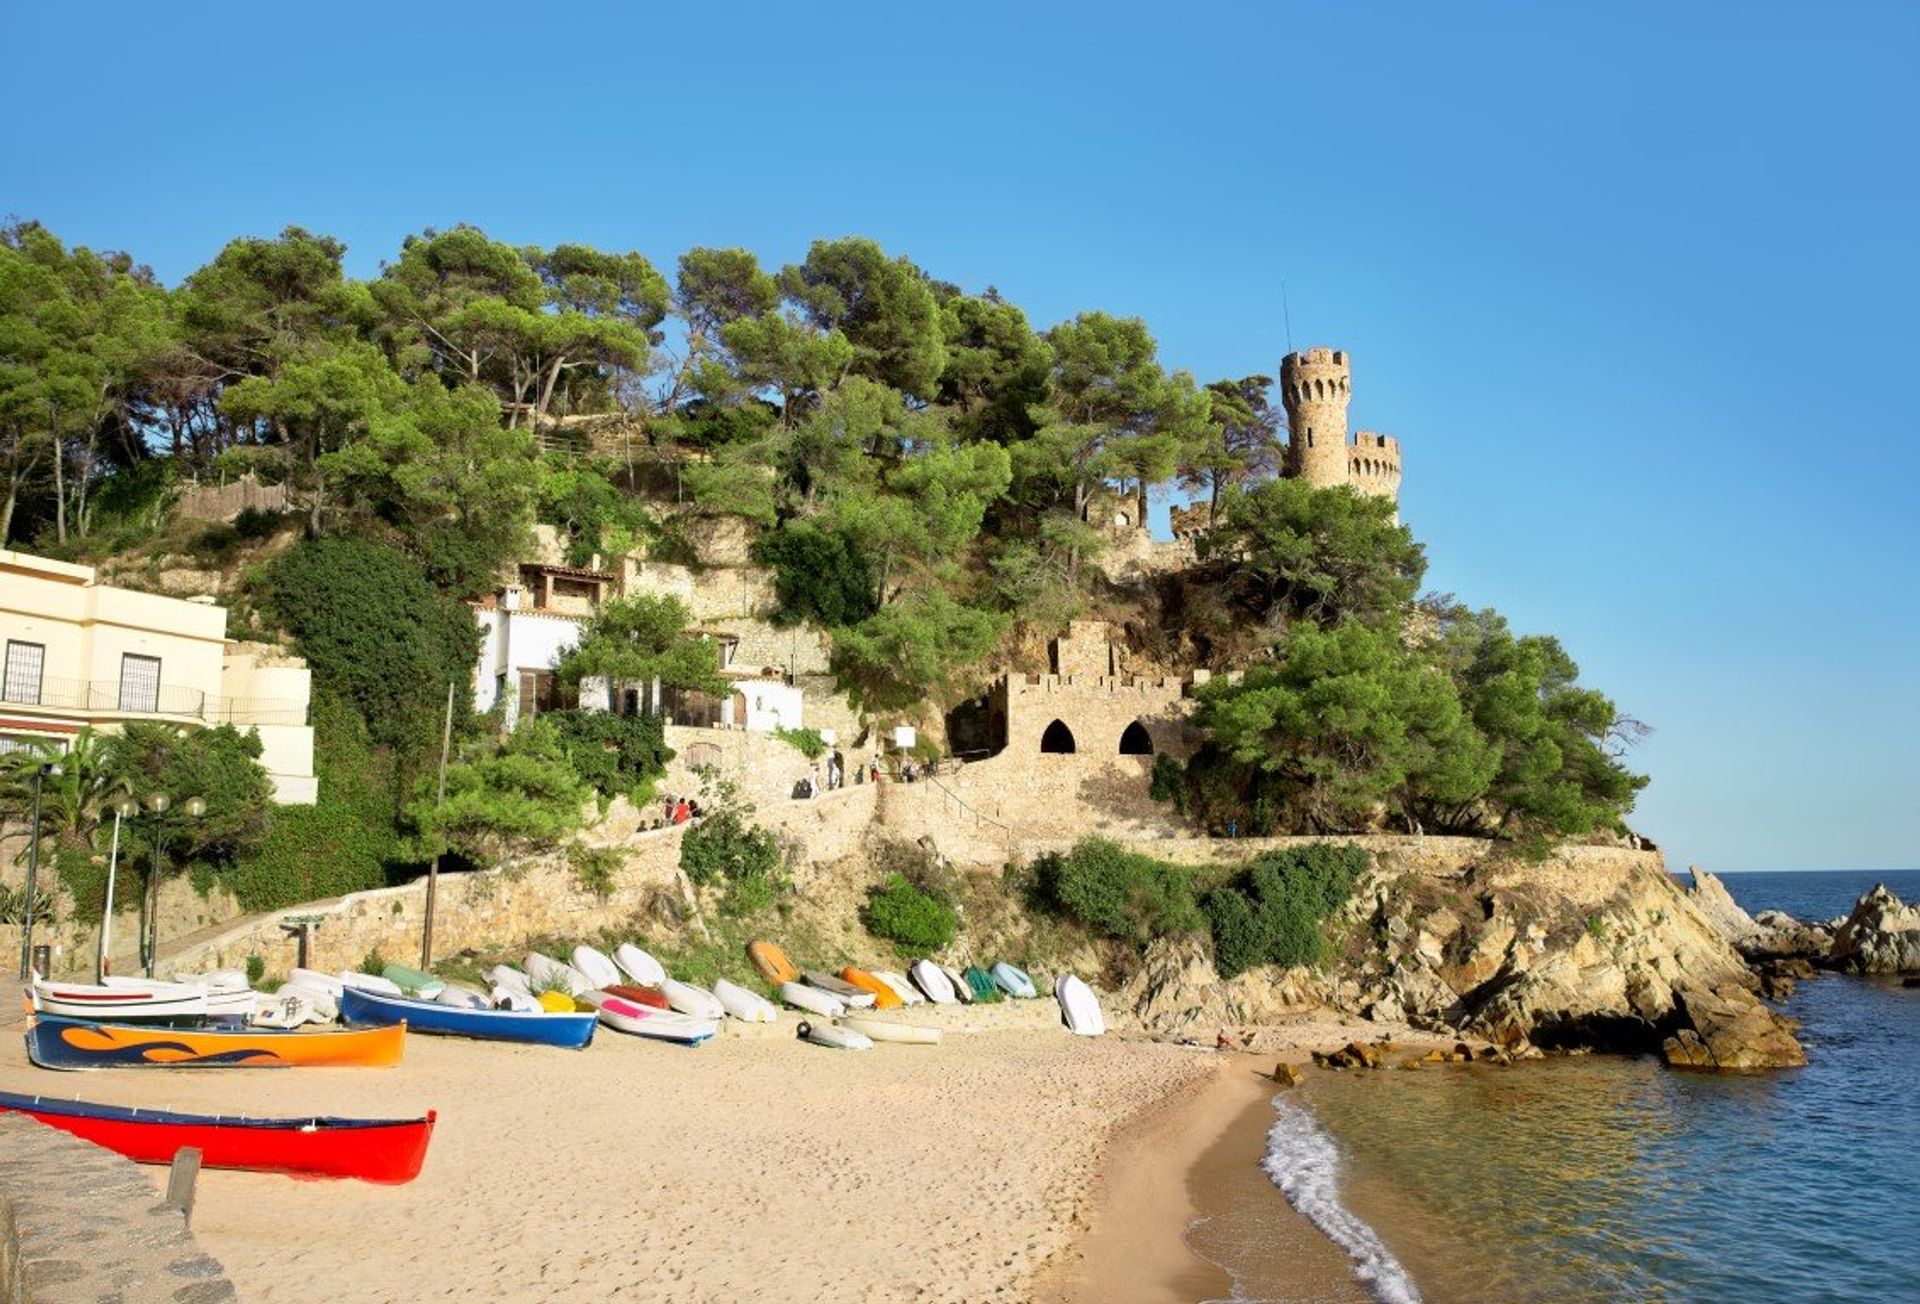 Tossa de Mar's ancient town in the distance with the fortified walls of Sant Joan's Castle